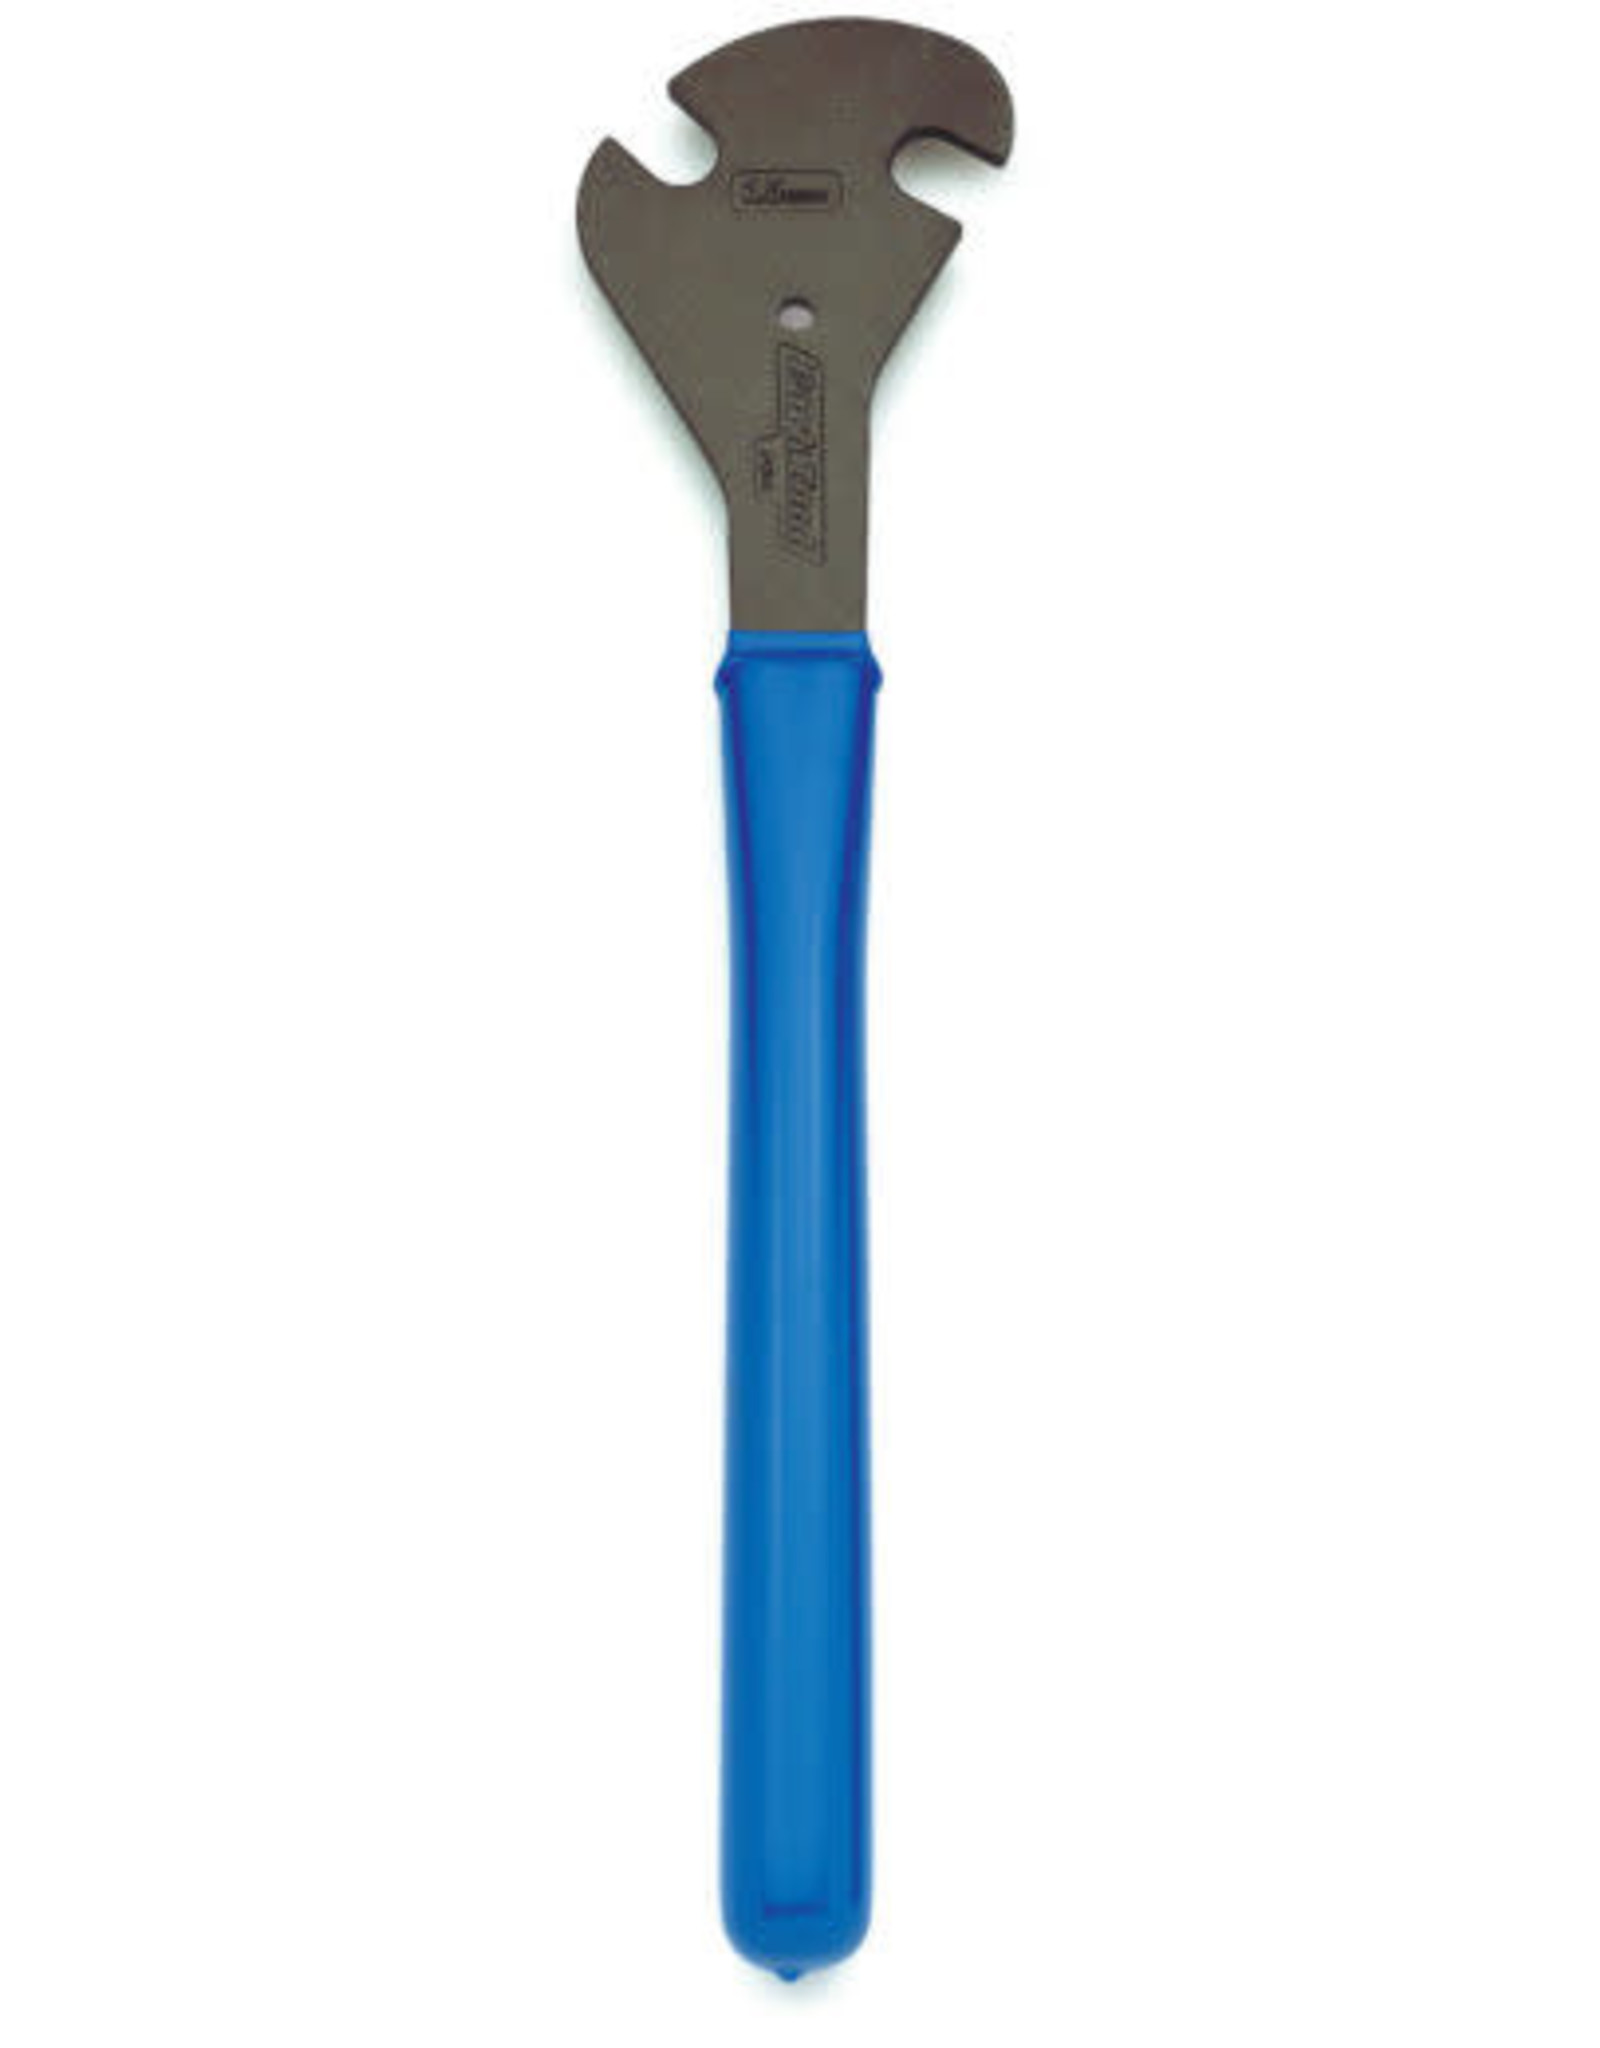 Park Tool Park Tool PW-4 Pedal Wrench